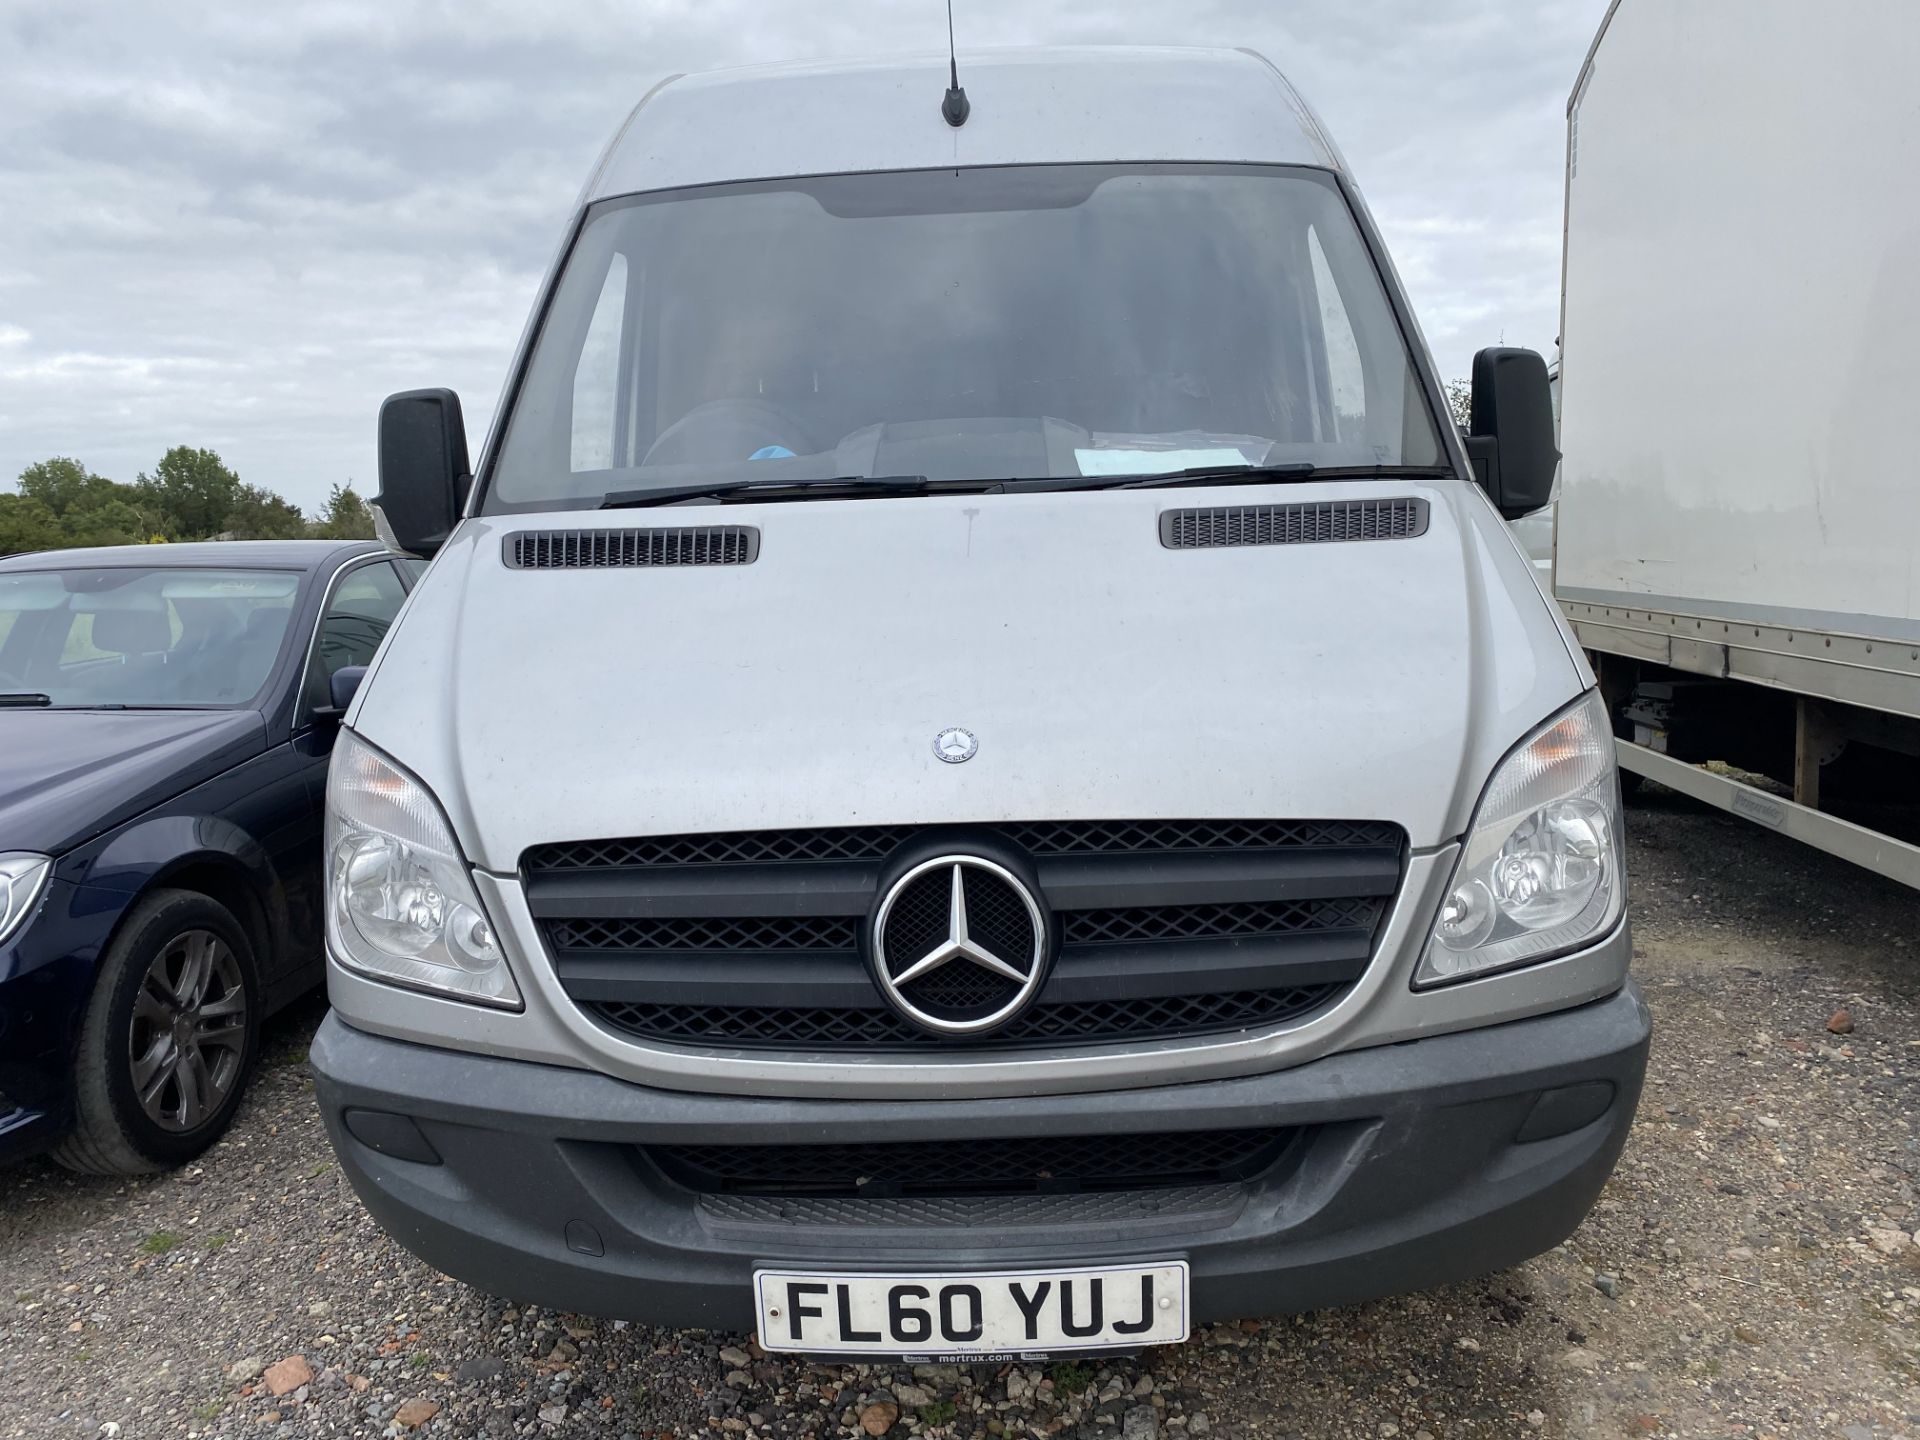 On Sale MERCEDES SPRINTER 313CDI "MWB" HIGH ROOF - 60 REG - EURO 5 - AIR CON - SILVER - ELEC PACK - - Image 3 of 15